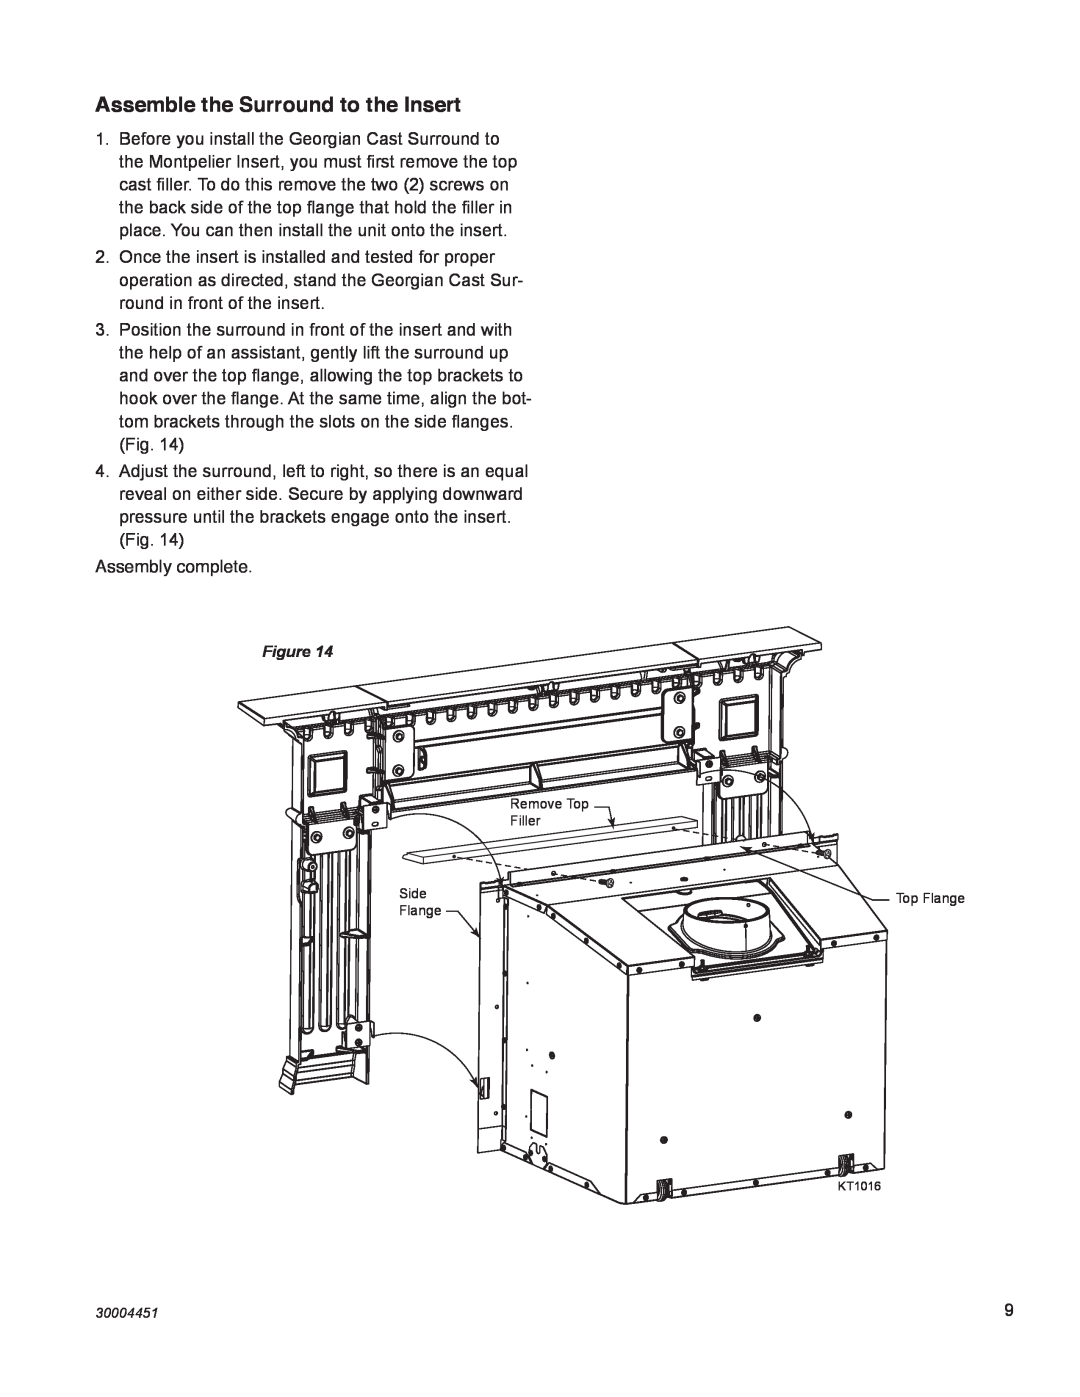 Vermont Casting MEAD3EB, MEAD3CB, MEAD3BS installation instructions Assemble the Surround to the Insert 